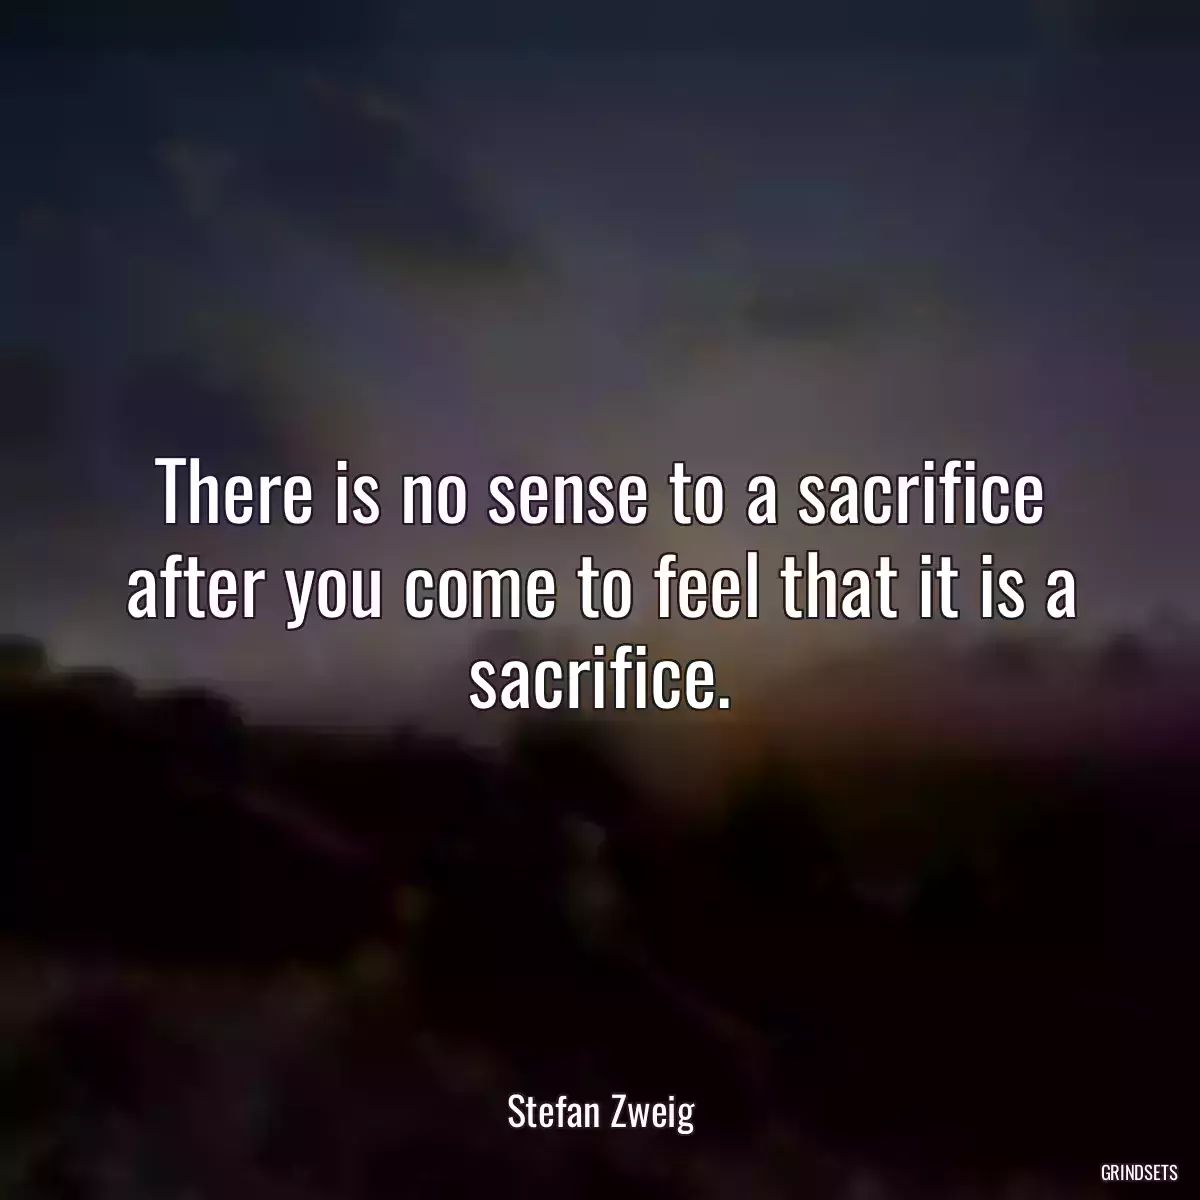 There is no sense to a sacrifice after you come to feel that it is a sacrifice.